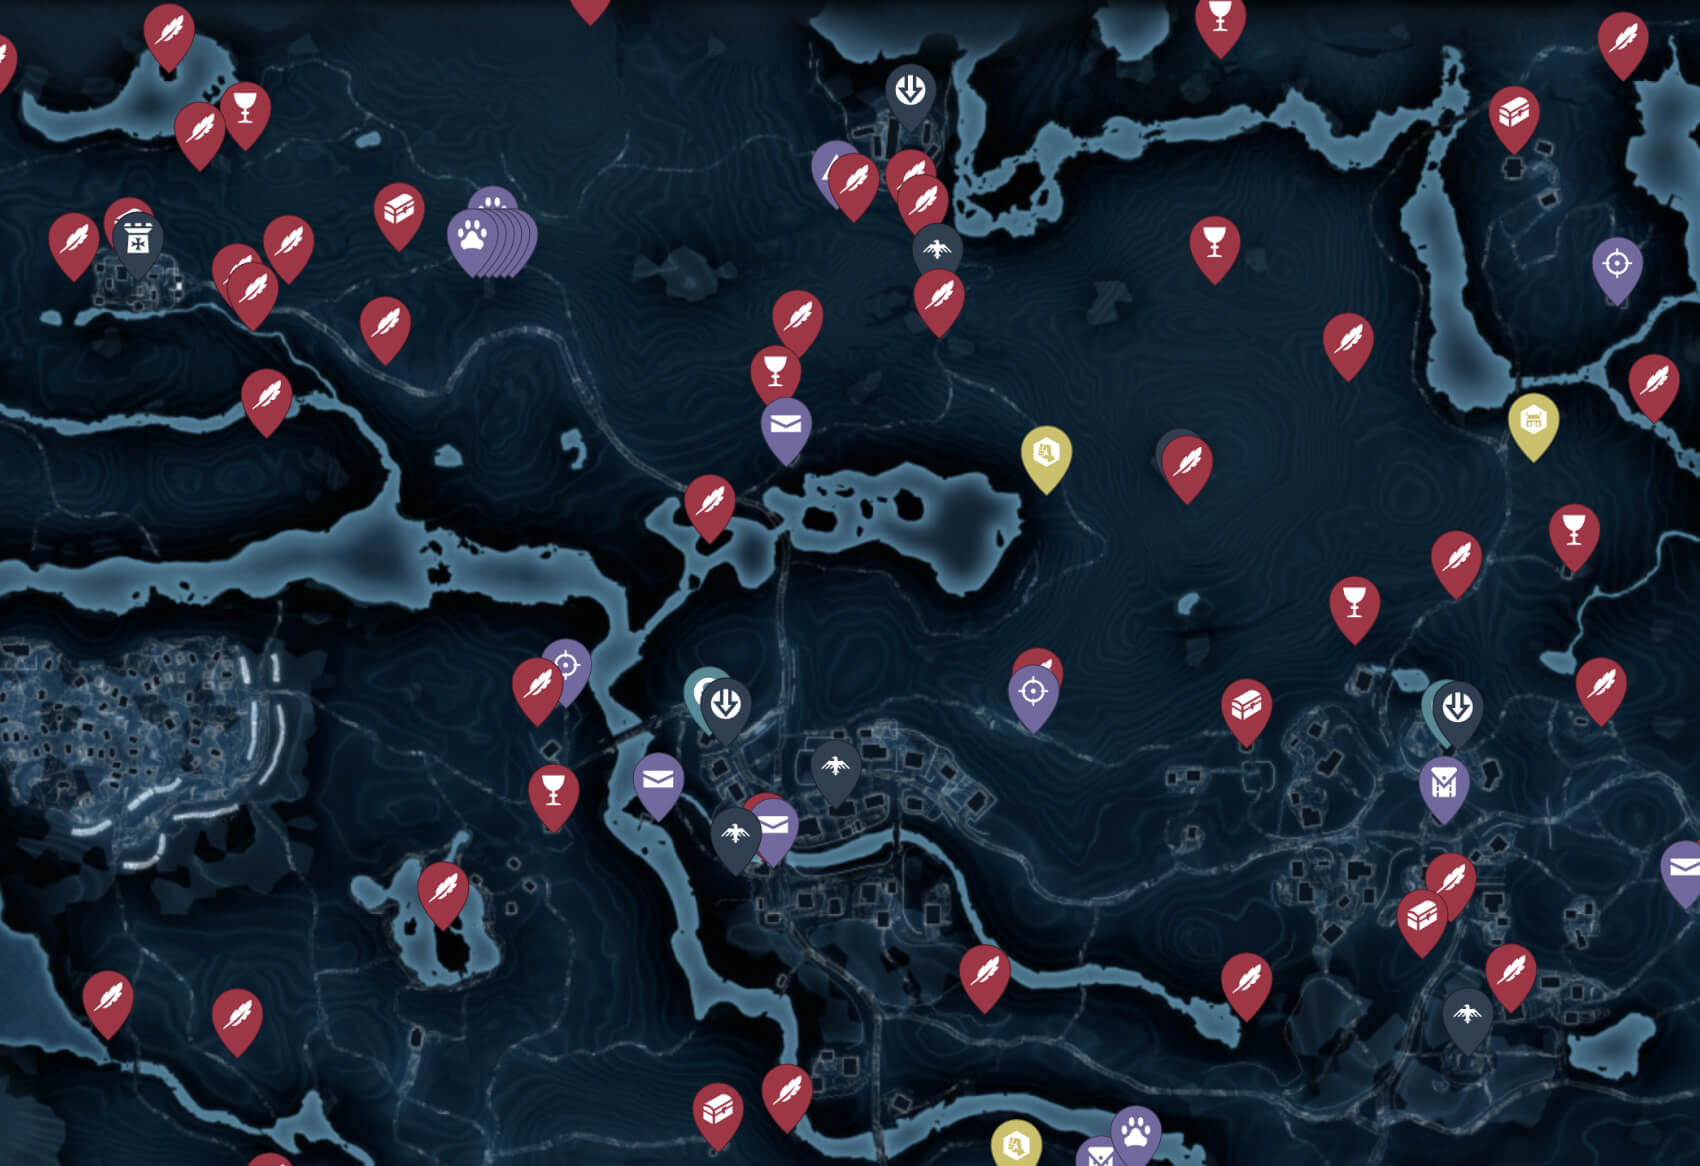 Assassin's Creed III Map Image